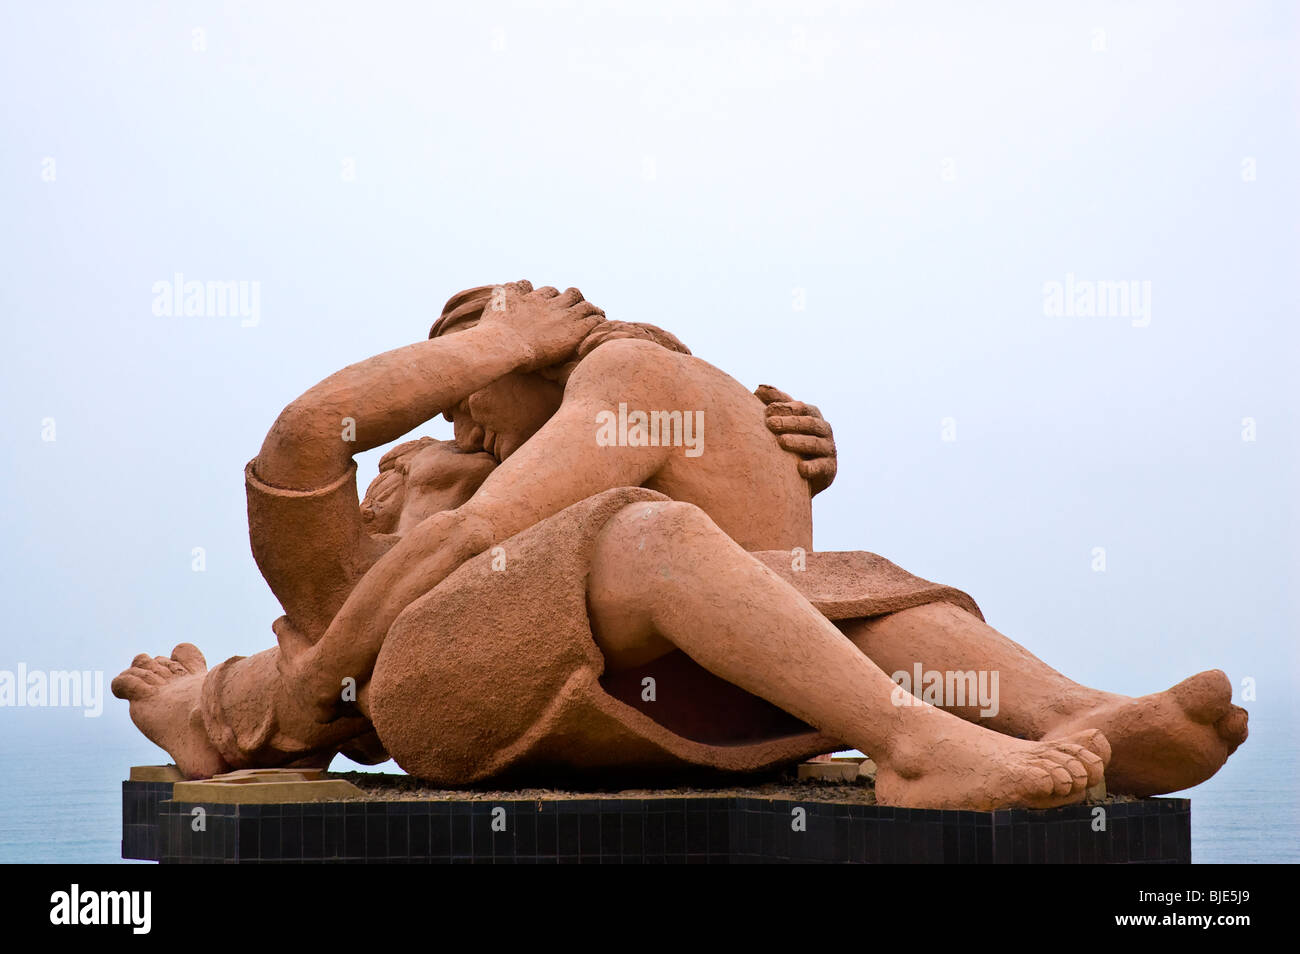 A clay statue of a man kissing a woman (The Monument to Love) in the Miraflores district in Lima, Peru. Stock Photo